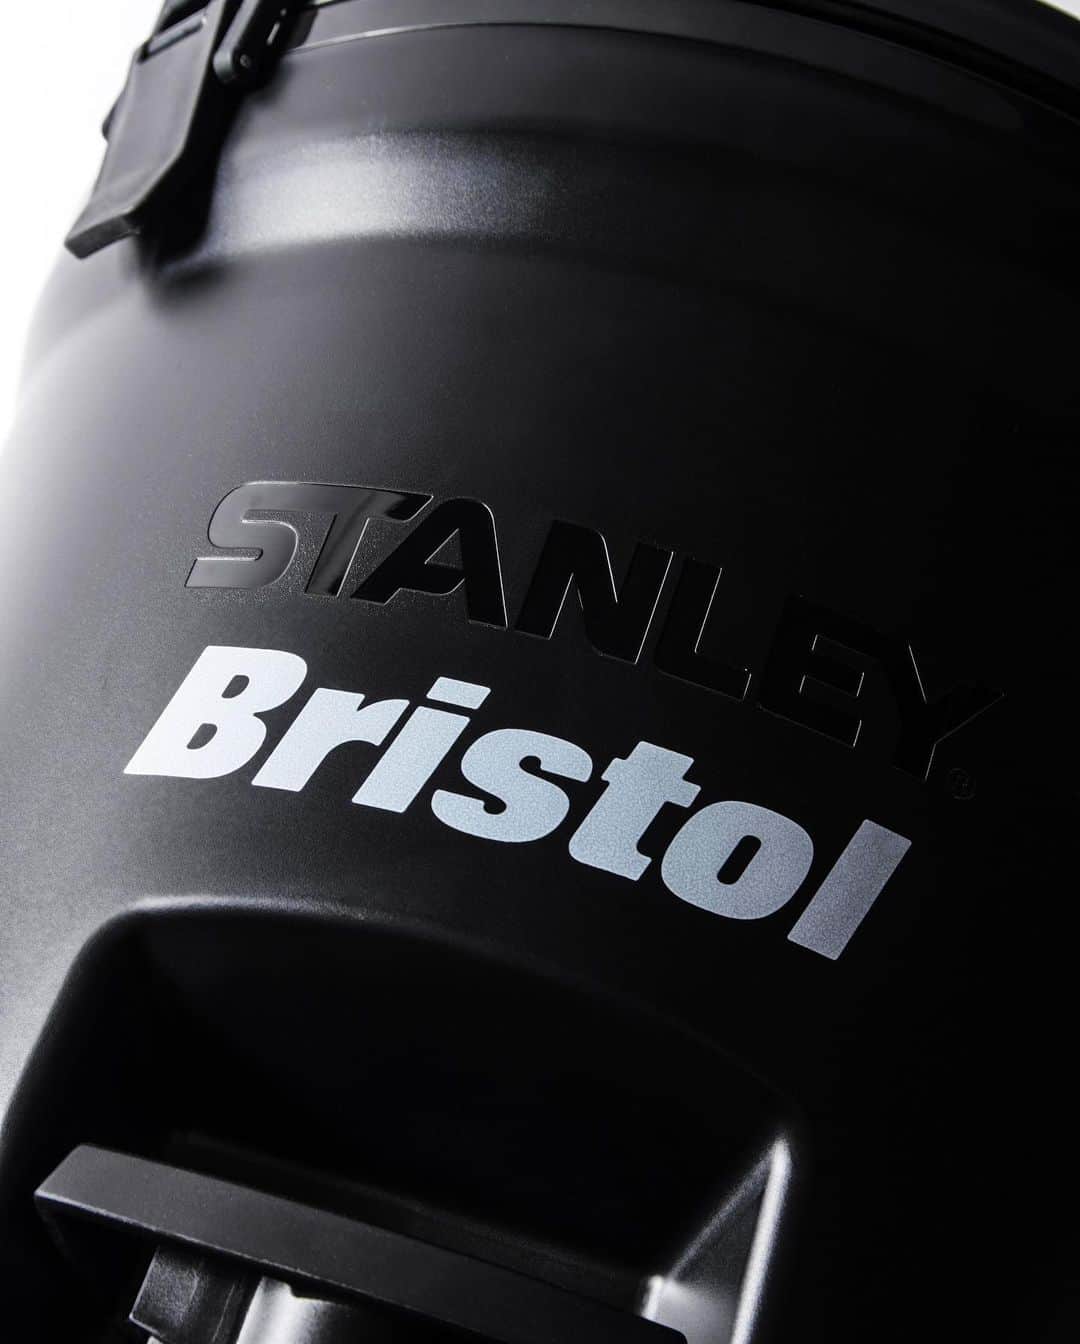 ソフさんのインスタグラム写真 - (ソフInstagram)「“F.C.Real Bristol × STANLEY” RELEASE on APRIL 7 (FRI) ⠀ ・STANLEY COOLER BOX : ￥19,800 (TAX INC) / W42.5xH28.5xD32.5cm / 15.1L ・STANLEY WATER JUG : ￥15,400 (TAX INC) / W29.7xH34.3xD29.7cm / 7.5L ⠀ F.C.Real Bristolより、ニューチームギアとして、＜STANLEY＞とのコラボレーションによるクーラーボックスと、ウォータージャグを発売します。 ⠀ 大容量かつ確かな保冷力と耐久性を擁し、手にフィットするハンドルは中身を入れた重い状態でも持ち運びがしやすい設計に。どちらもF.C.R.B.のブラックを基調にロゴを配置した特別な仕上がりです。 ⠀ 4/7(金)より、SOPH.shop、SOPH.dealerにて、同日正午よりSOPH. ONLINE STOREにて発売。 ⠀ *入荷状況、販売方法は店舗によって異なりますので、詳細は各店舗までお問い合わせくださいますようお願い申し上げます。 *SOPH.shopでの通販につきましては、4/8(土)からとなります。 ⠀ F.C.Real Bristol will release a cooler box and a water jug as new team gear in collaboration with <STANLEY>. ⠀ The large capacity, reliable cold retention and durability, and the handle that fits in the hand make it easy to carry even when the contents are heavy. Both are specially finished with the F.C.R.B. logo on a black background. ⠀ Available at SOPH.shops, SOPH.dealers from 4/7(Fri), and SOPH. ONLINE STORE from 12:00pm(JST) on the same day. ⠀ *Please contact each store for details as the availability and sales method differ depending on the store. *As for the mail order at SOPH.shops, it starts from 4/8(Sat). ⠀ www.soph.net . #FCRB  #FCREALBRISTOL  #STANLEY #FCRBxSTANLEY @stanley_jp」4月4日 18時01分 - soph_co_ltd